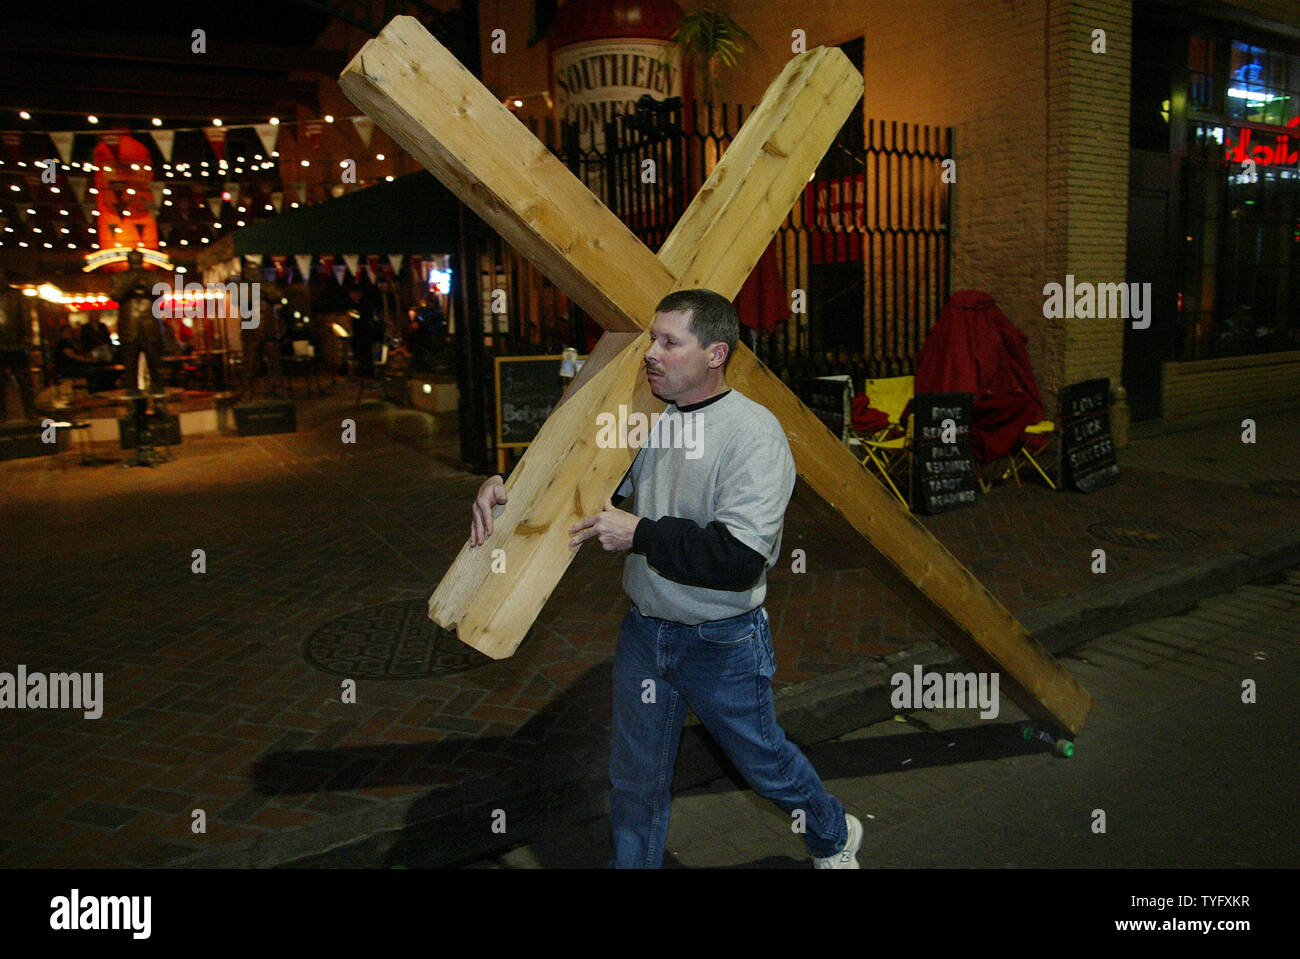 Paul Campbell of Anderson, Missouri walks down Bourbon Street in the French Quarter district of New Orleans with a large wooden cross February 23, 2006. While most visitors come to Carnival to party and have a good time, Campbell said he was here to save the souls of sinners.  (UPI Photo/A.J. Sisco) Stock Photo